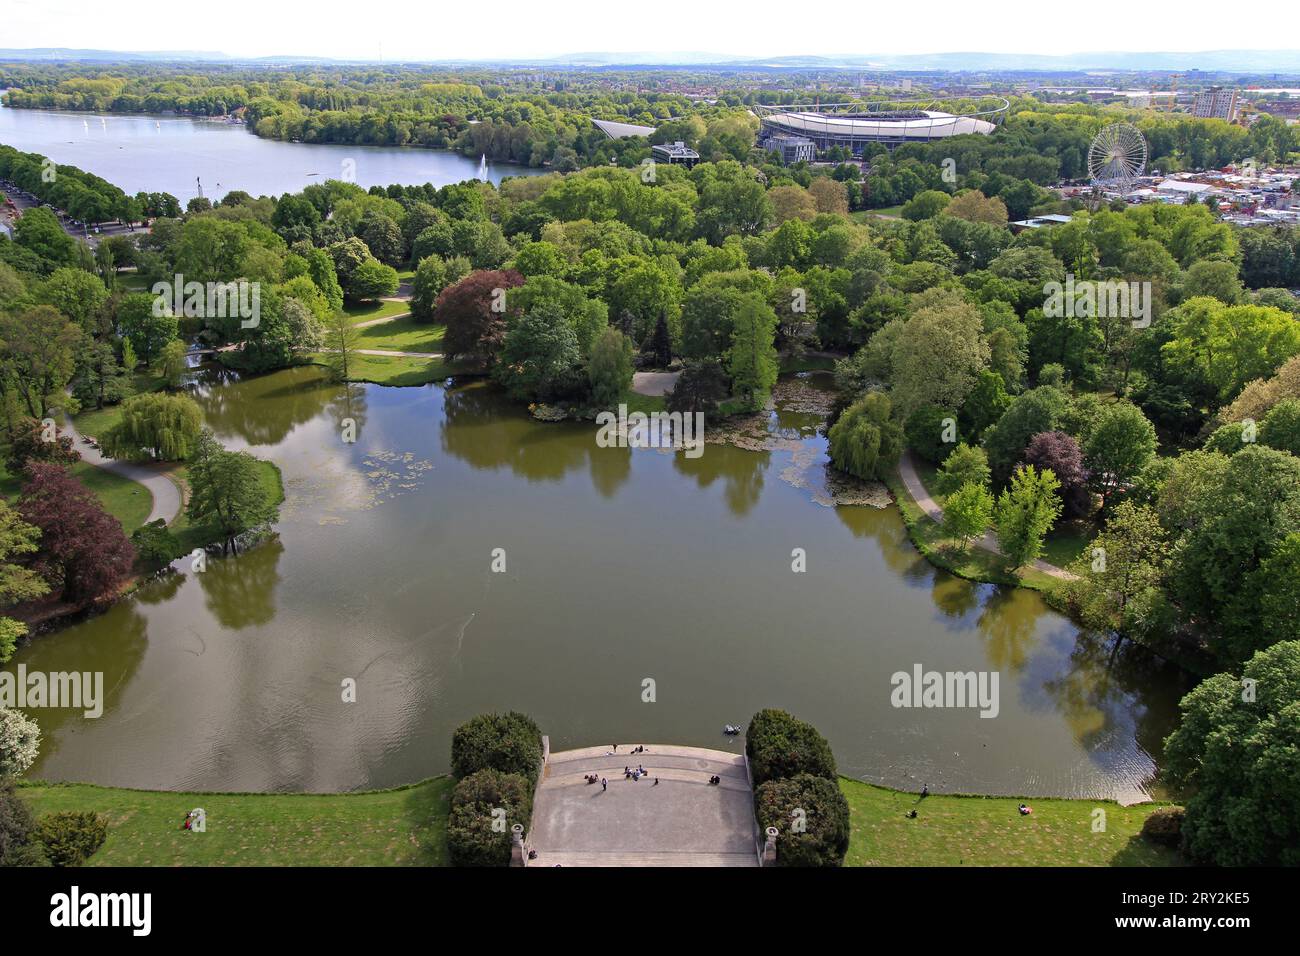 Hanover, Germany - May 03, 2011: Aerial View of Masch Park Lake Green Nature Oasis in City at Spring Day. Stock Photo